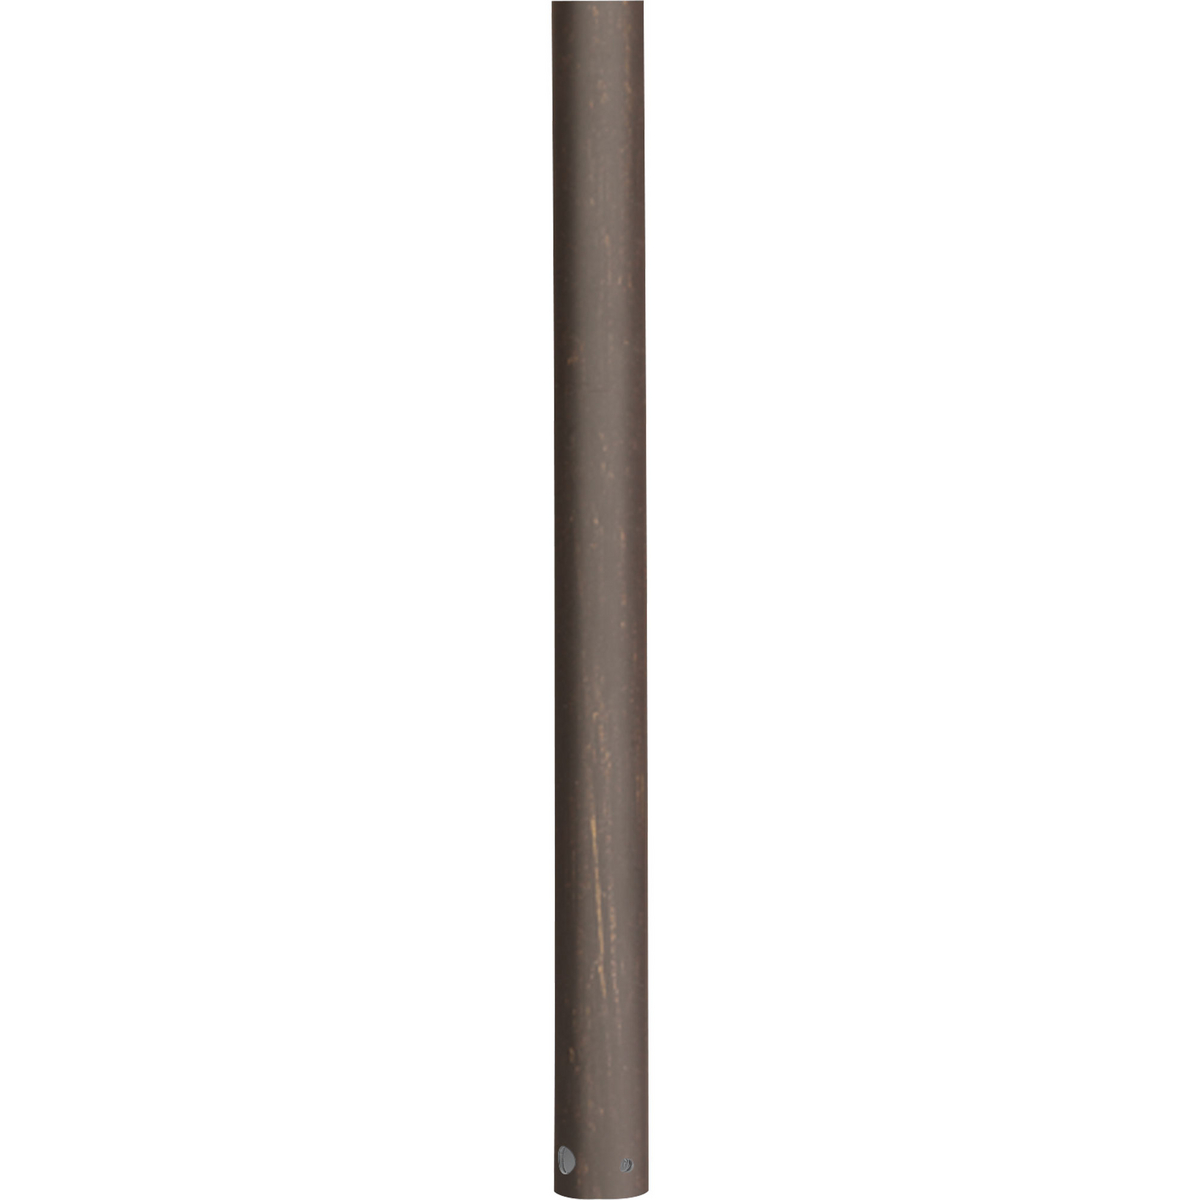 3/4 In. x 24 In. downrod for use with any Progress Lighting ceiling fan. Use of a fan downrod positions your ceiling fan at the optimal height for air circulation and provides the perfect solution for installation on high cathedral ceilings or in great rooms. Refer to the selection guide for recommended downrod lengths based upon your ceiling height. Antique Bronze finish.